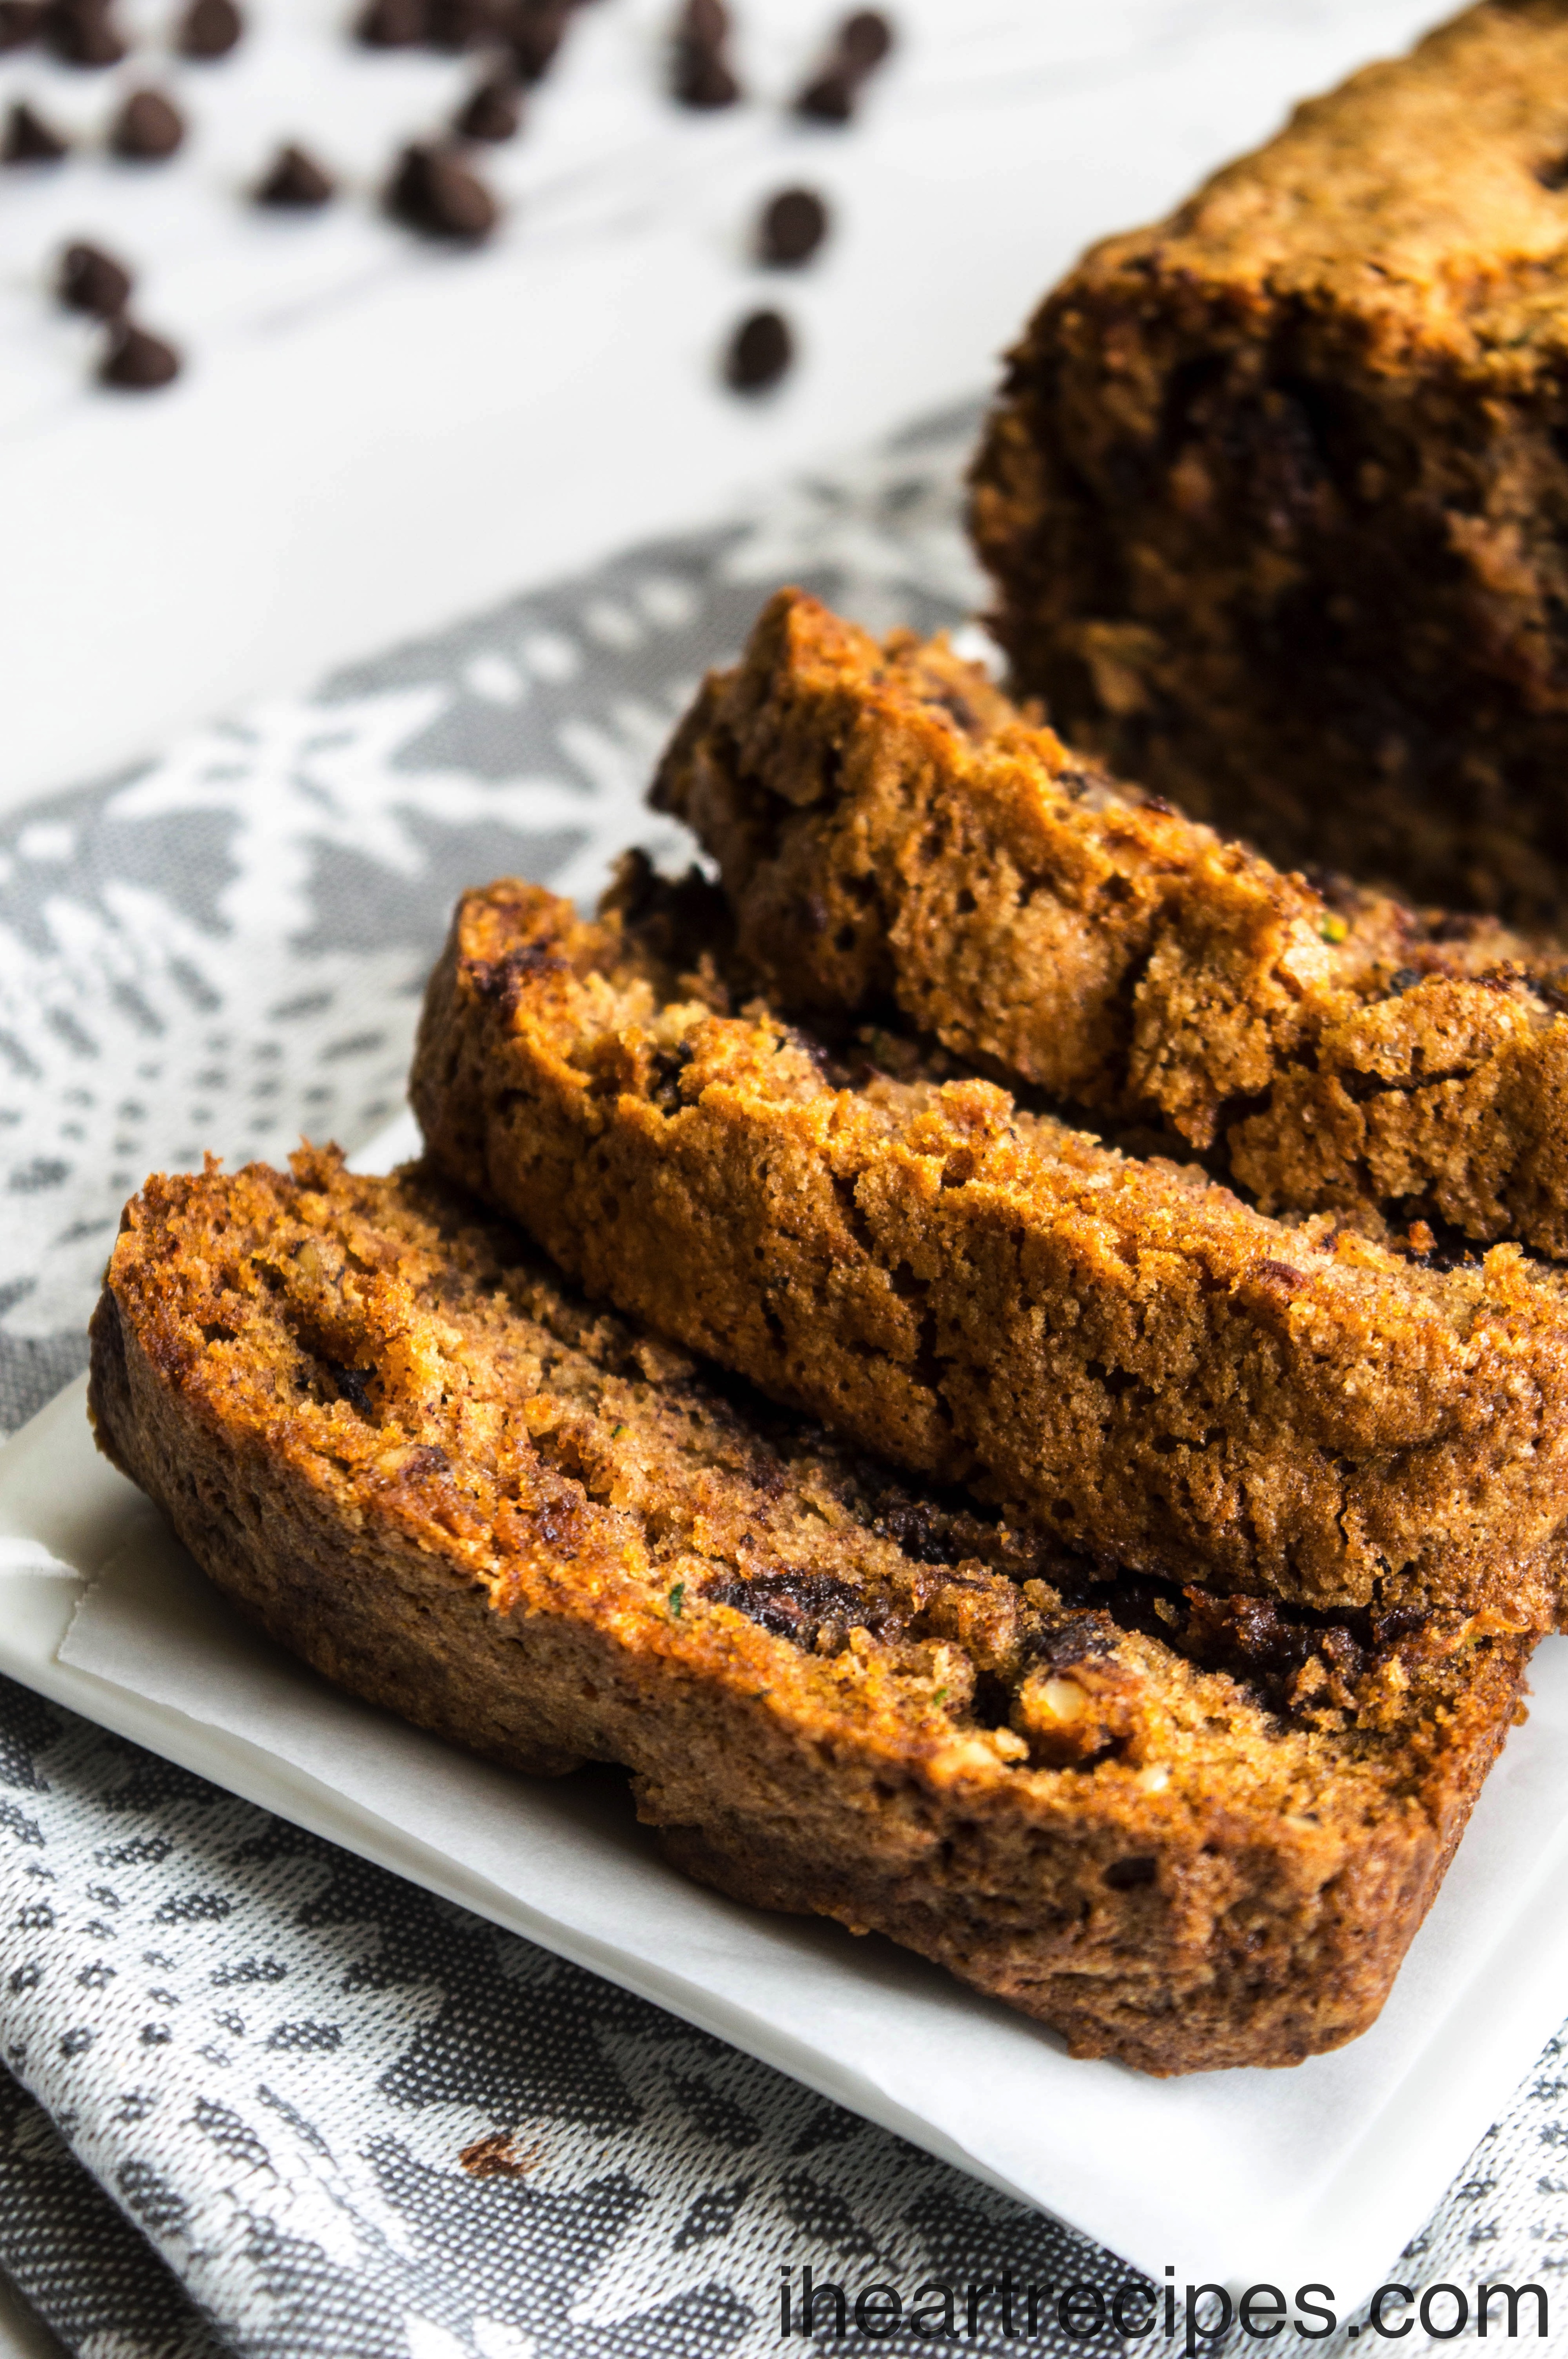 Tender zucchini bread with gooey chocolate chips served on a white platter. It's a simple, sweet dessert.